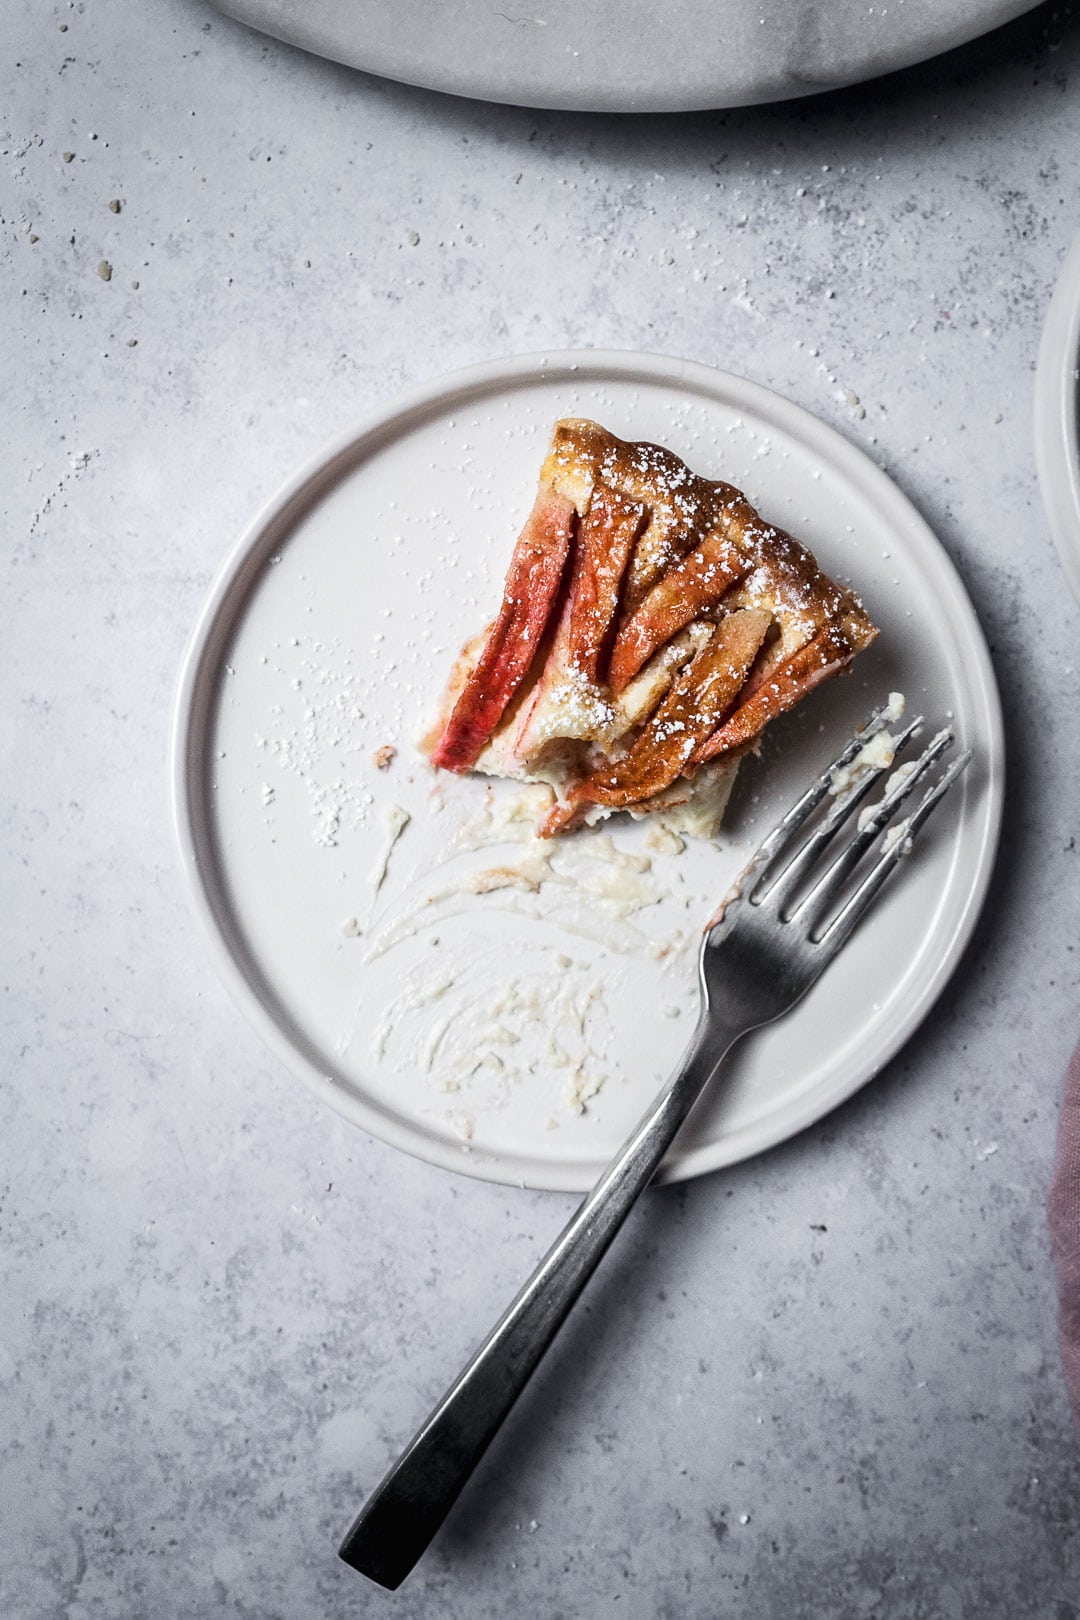 Partially eaten slice of Pink Apple Tart with Cream Cheese Filling on a white plate with a fork, all resting on a grey background